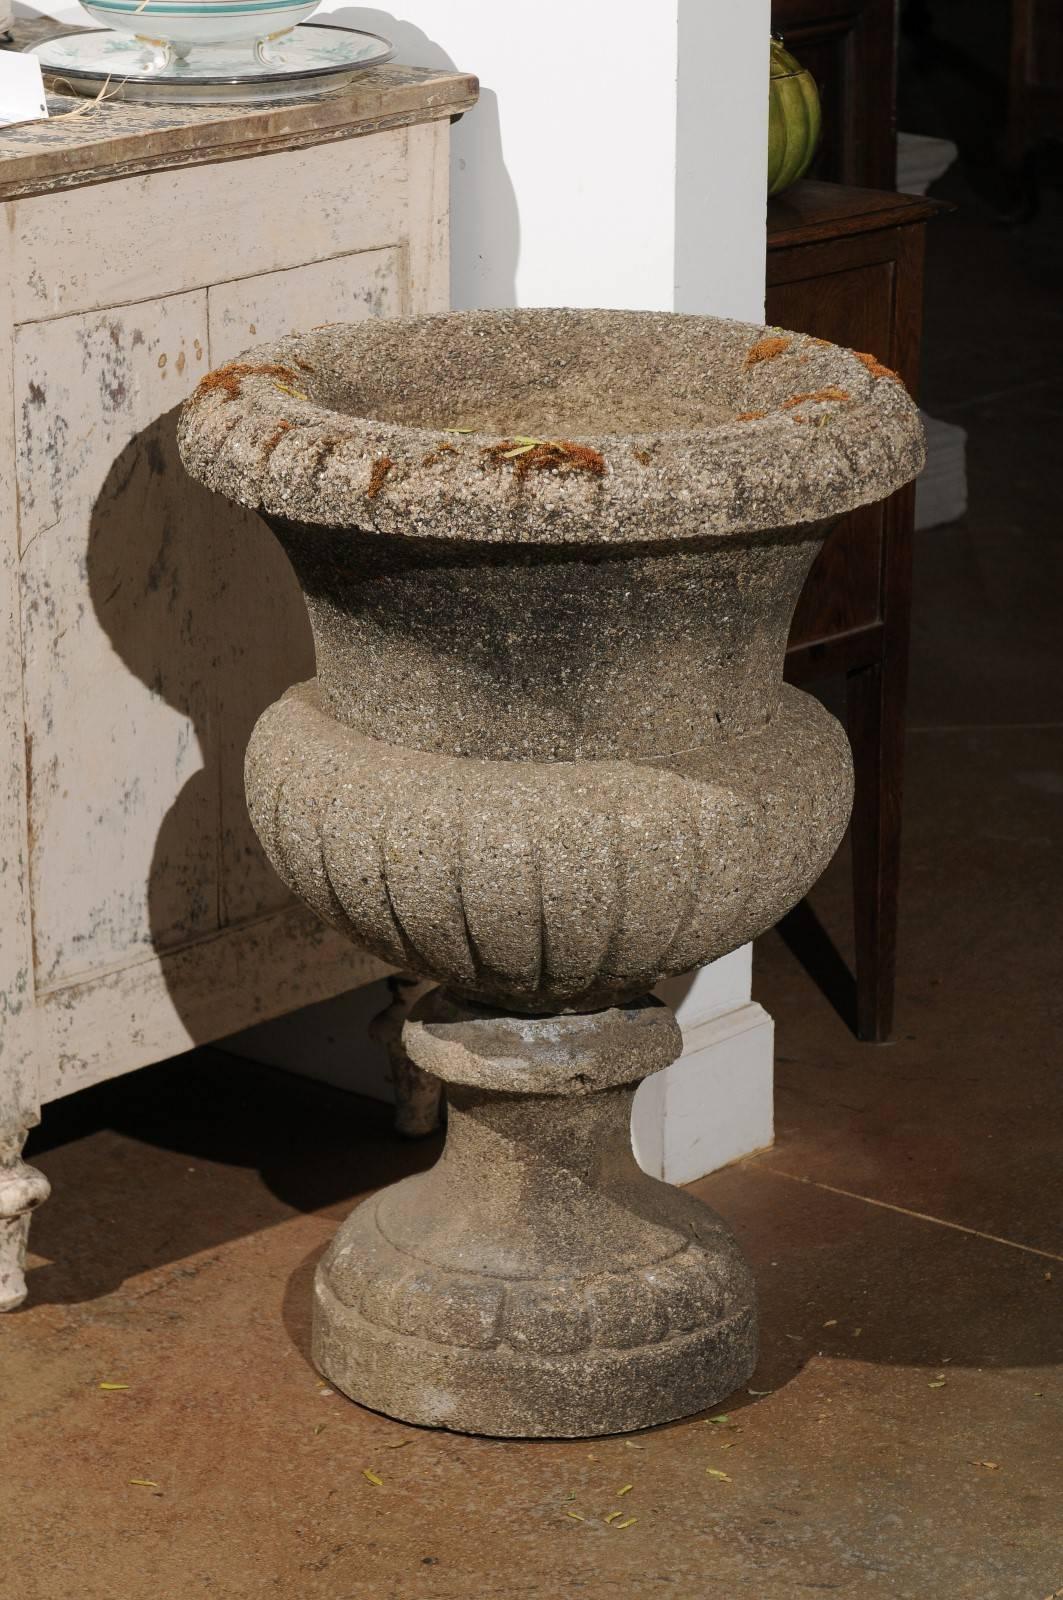 A pair of French stone planters in the style of the vase Médicis, from the late 19th century. Each of this pair of stone planters features a chalice shape, typical of the original Medici vase kept at the Uffizi gallery in Florence. Inspired by the